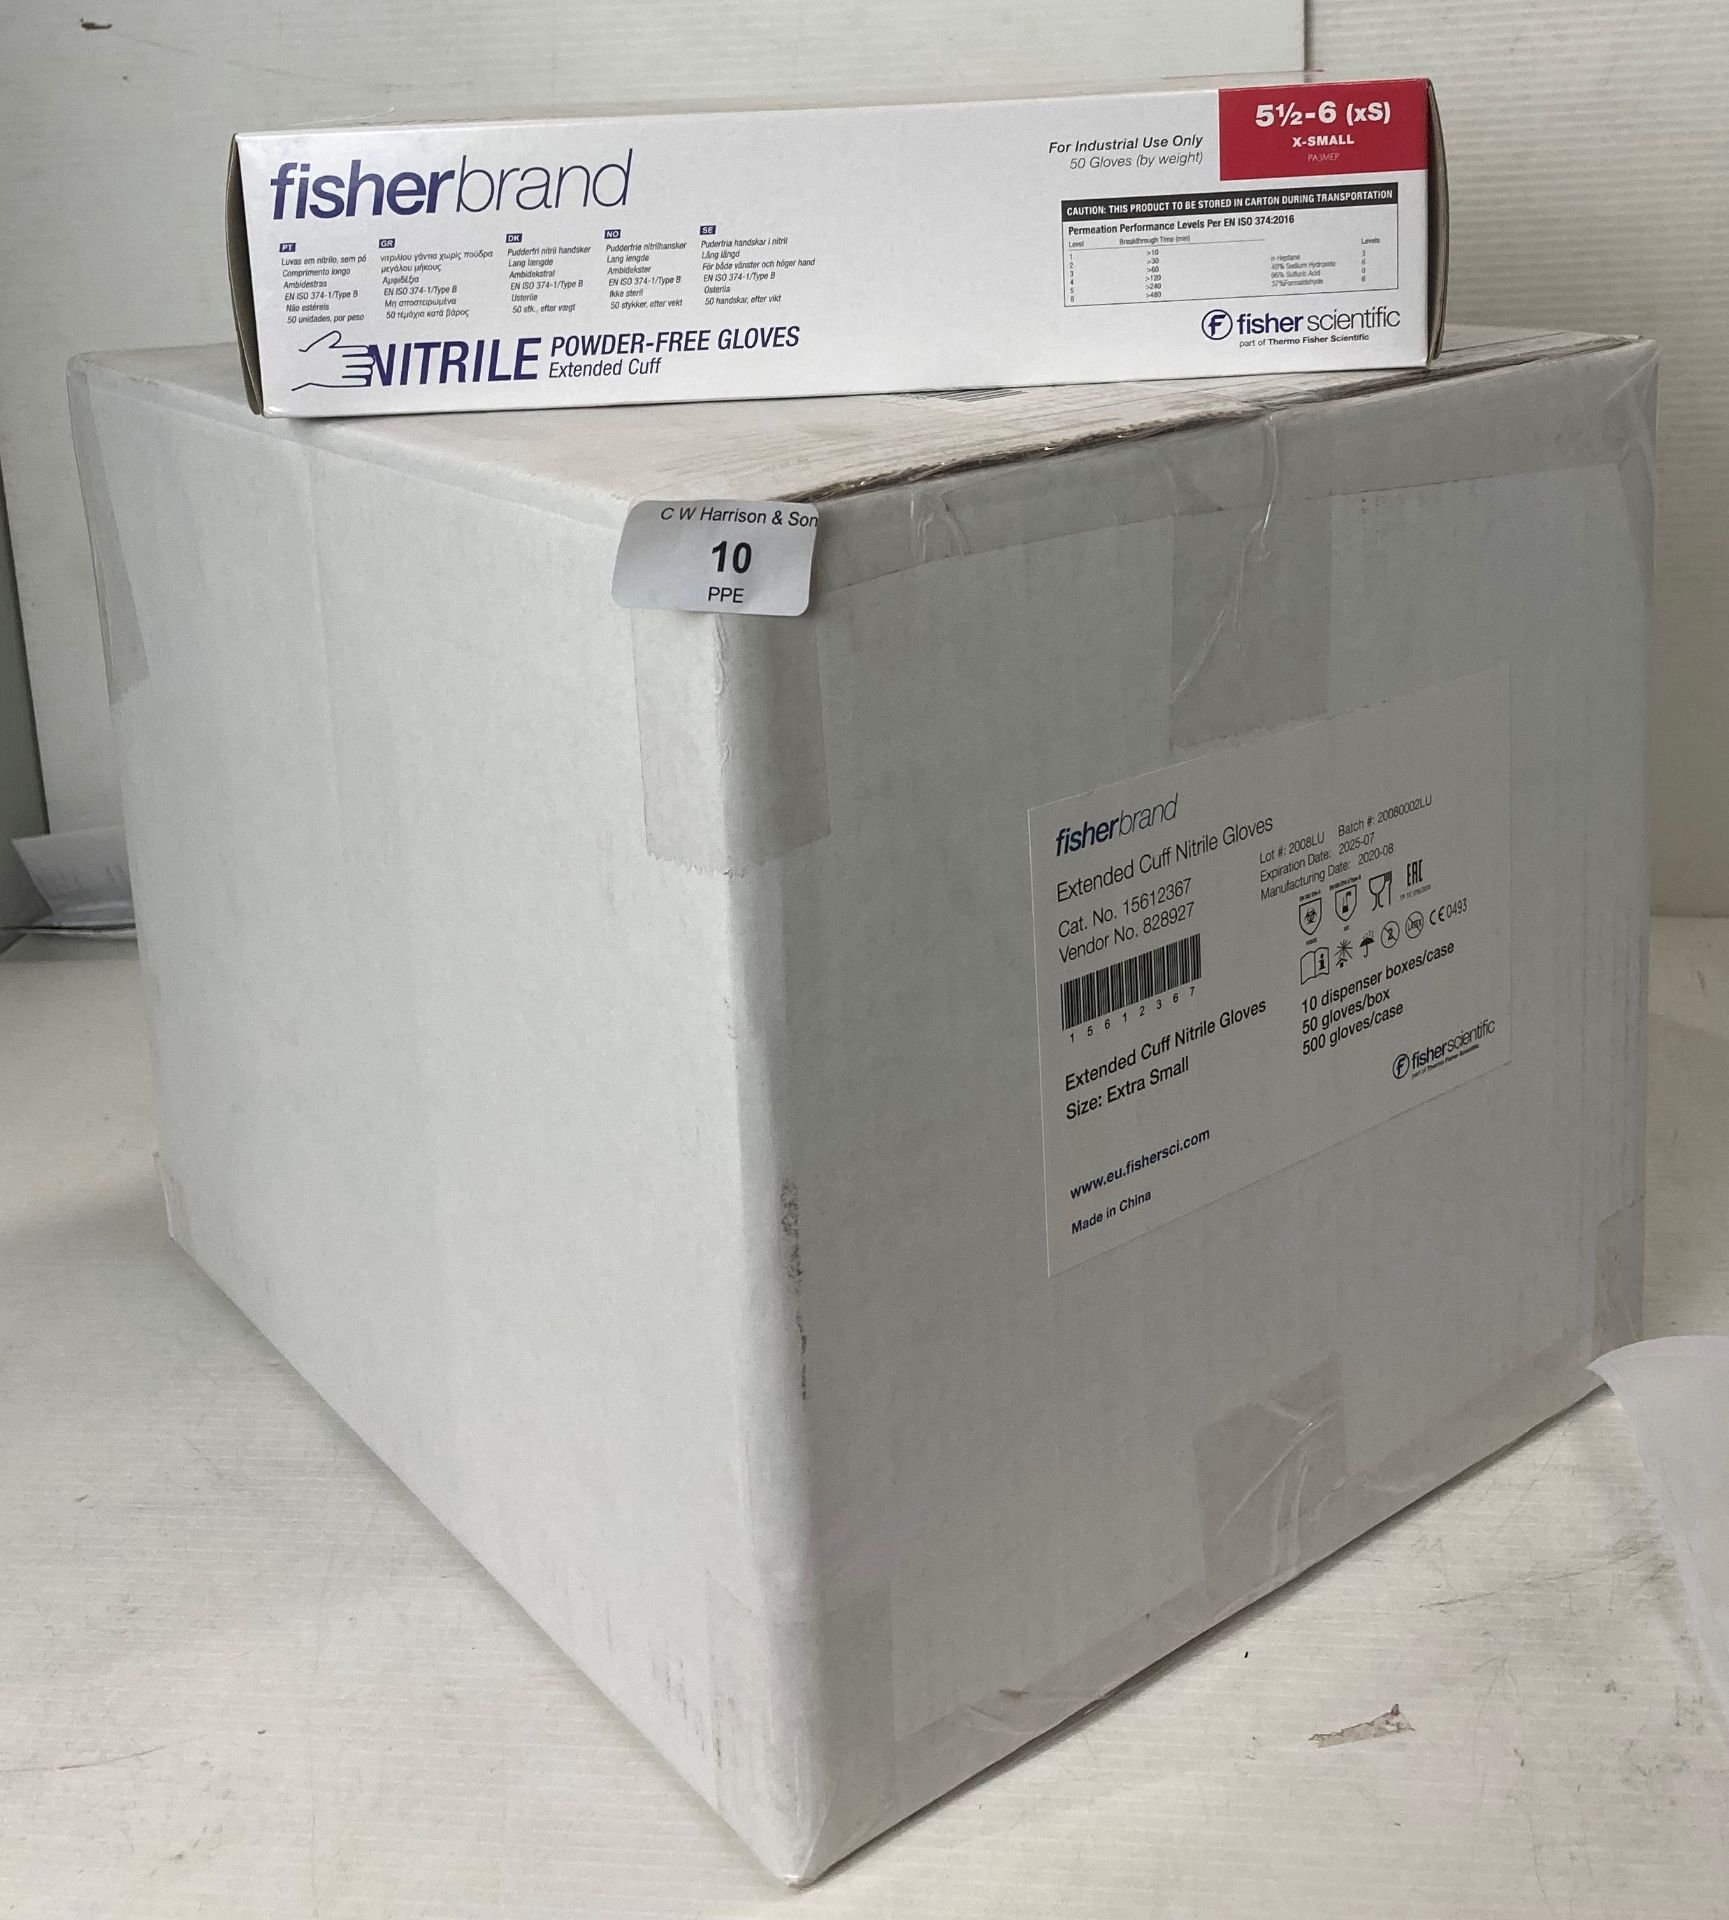 10 boxes of (1 outer box) Fisherbrand extended cuff Nitrile gloves - size XS